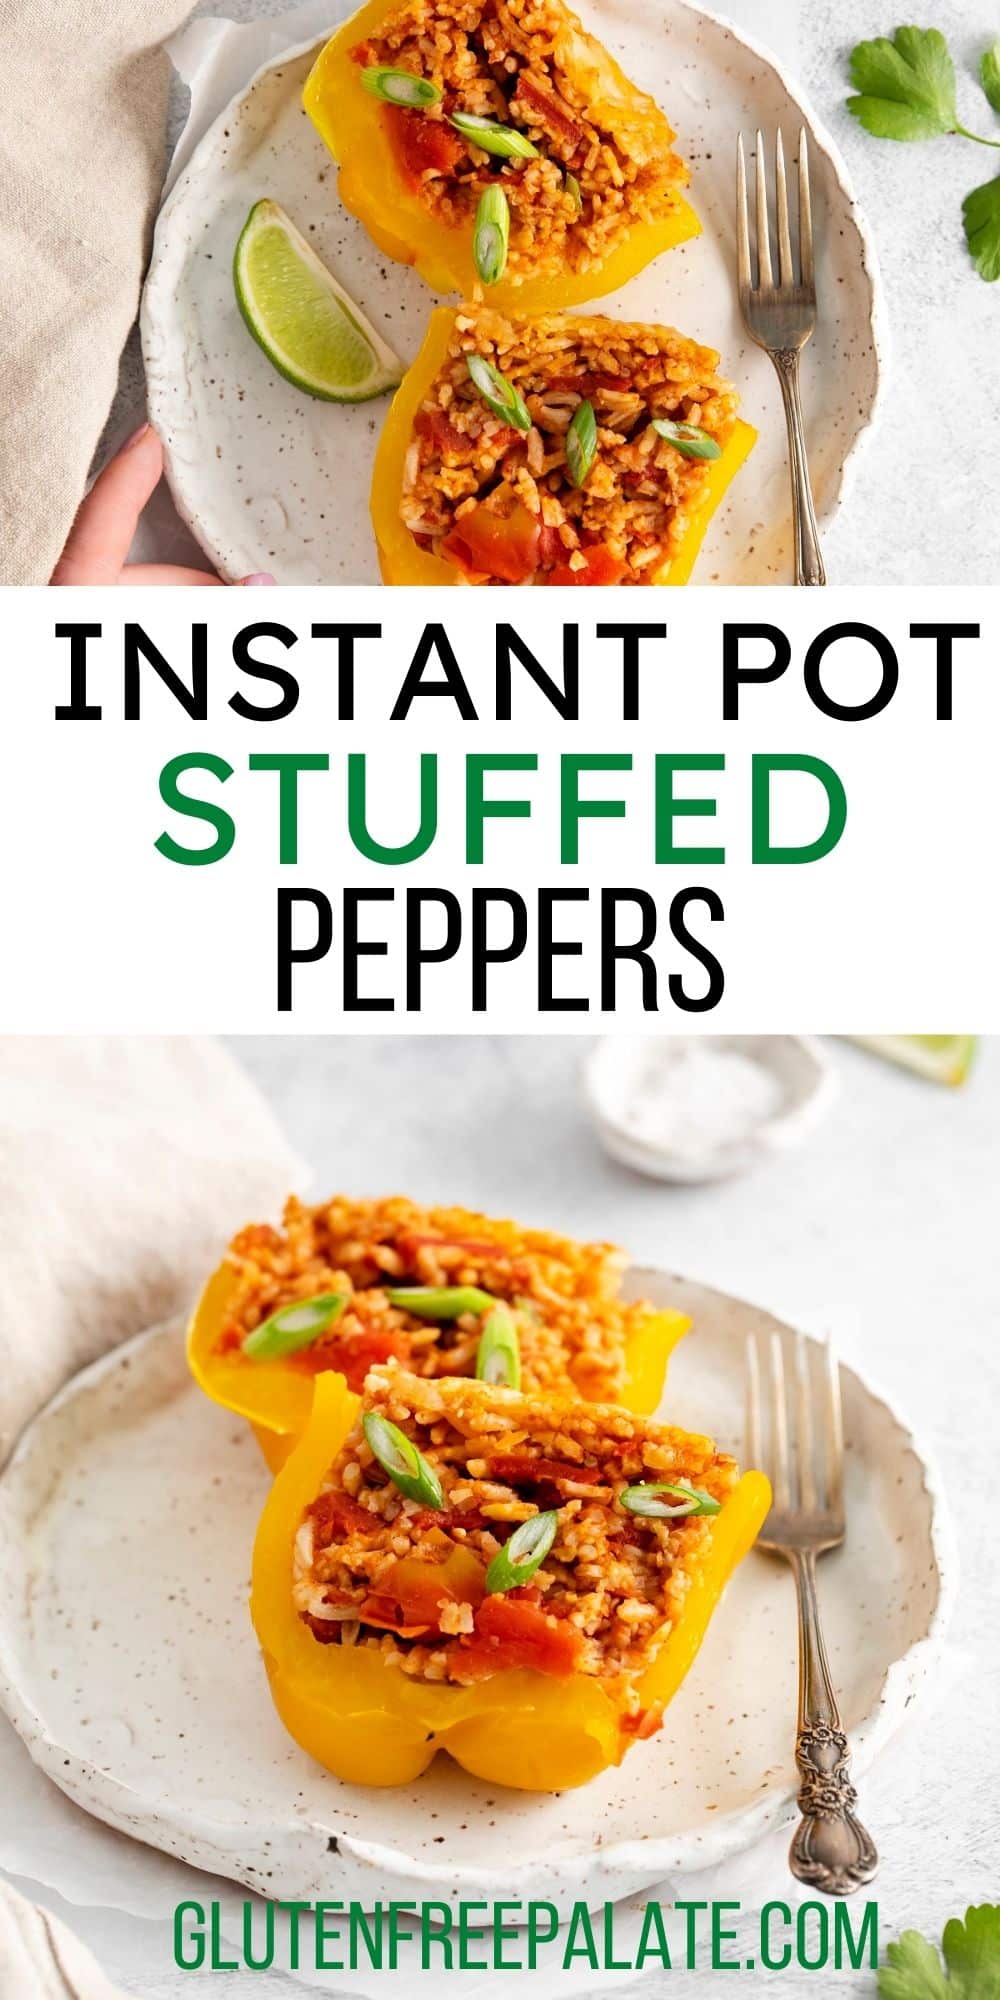 Images of yellow peppers stuffed with rice and topped with green onion. Text overlay says Instant Pot Stuffed peppers